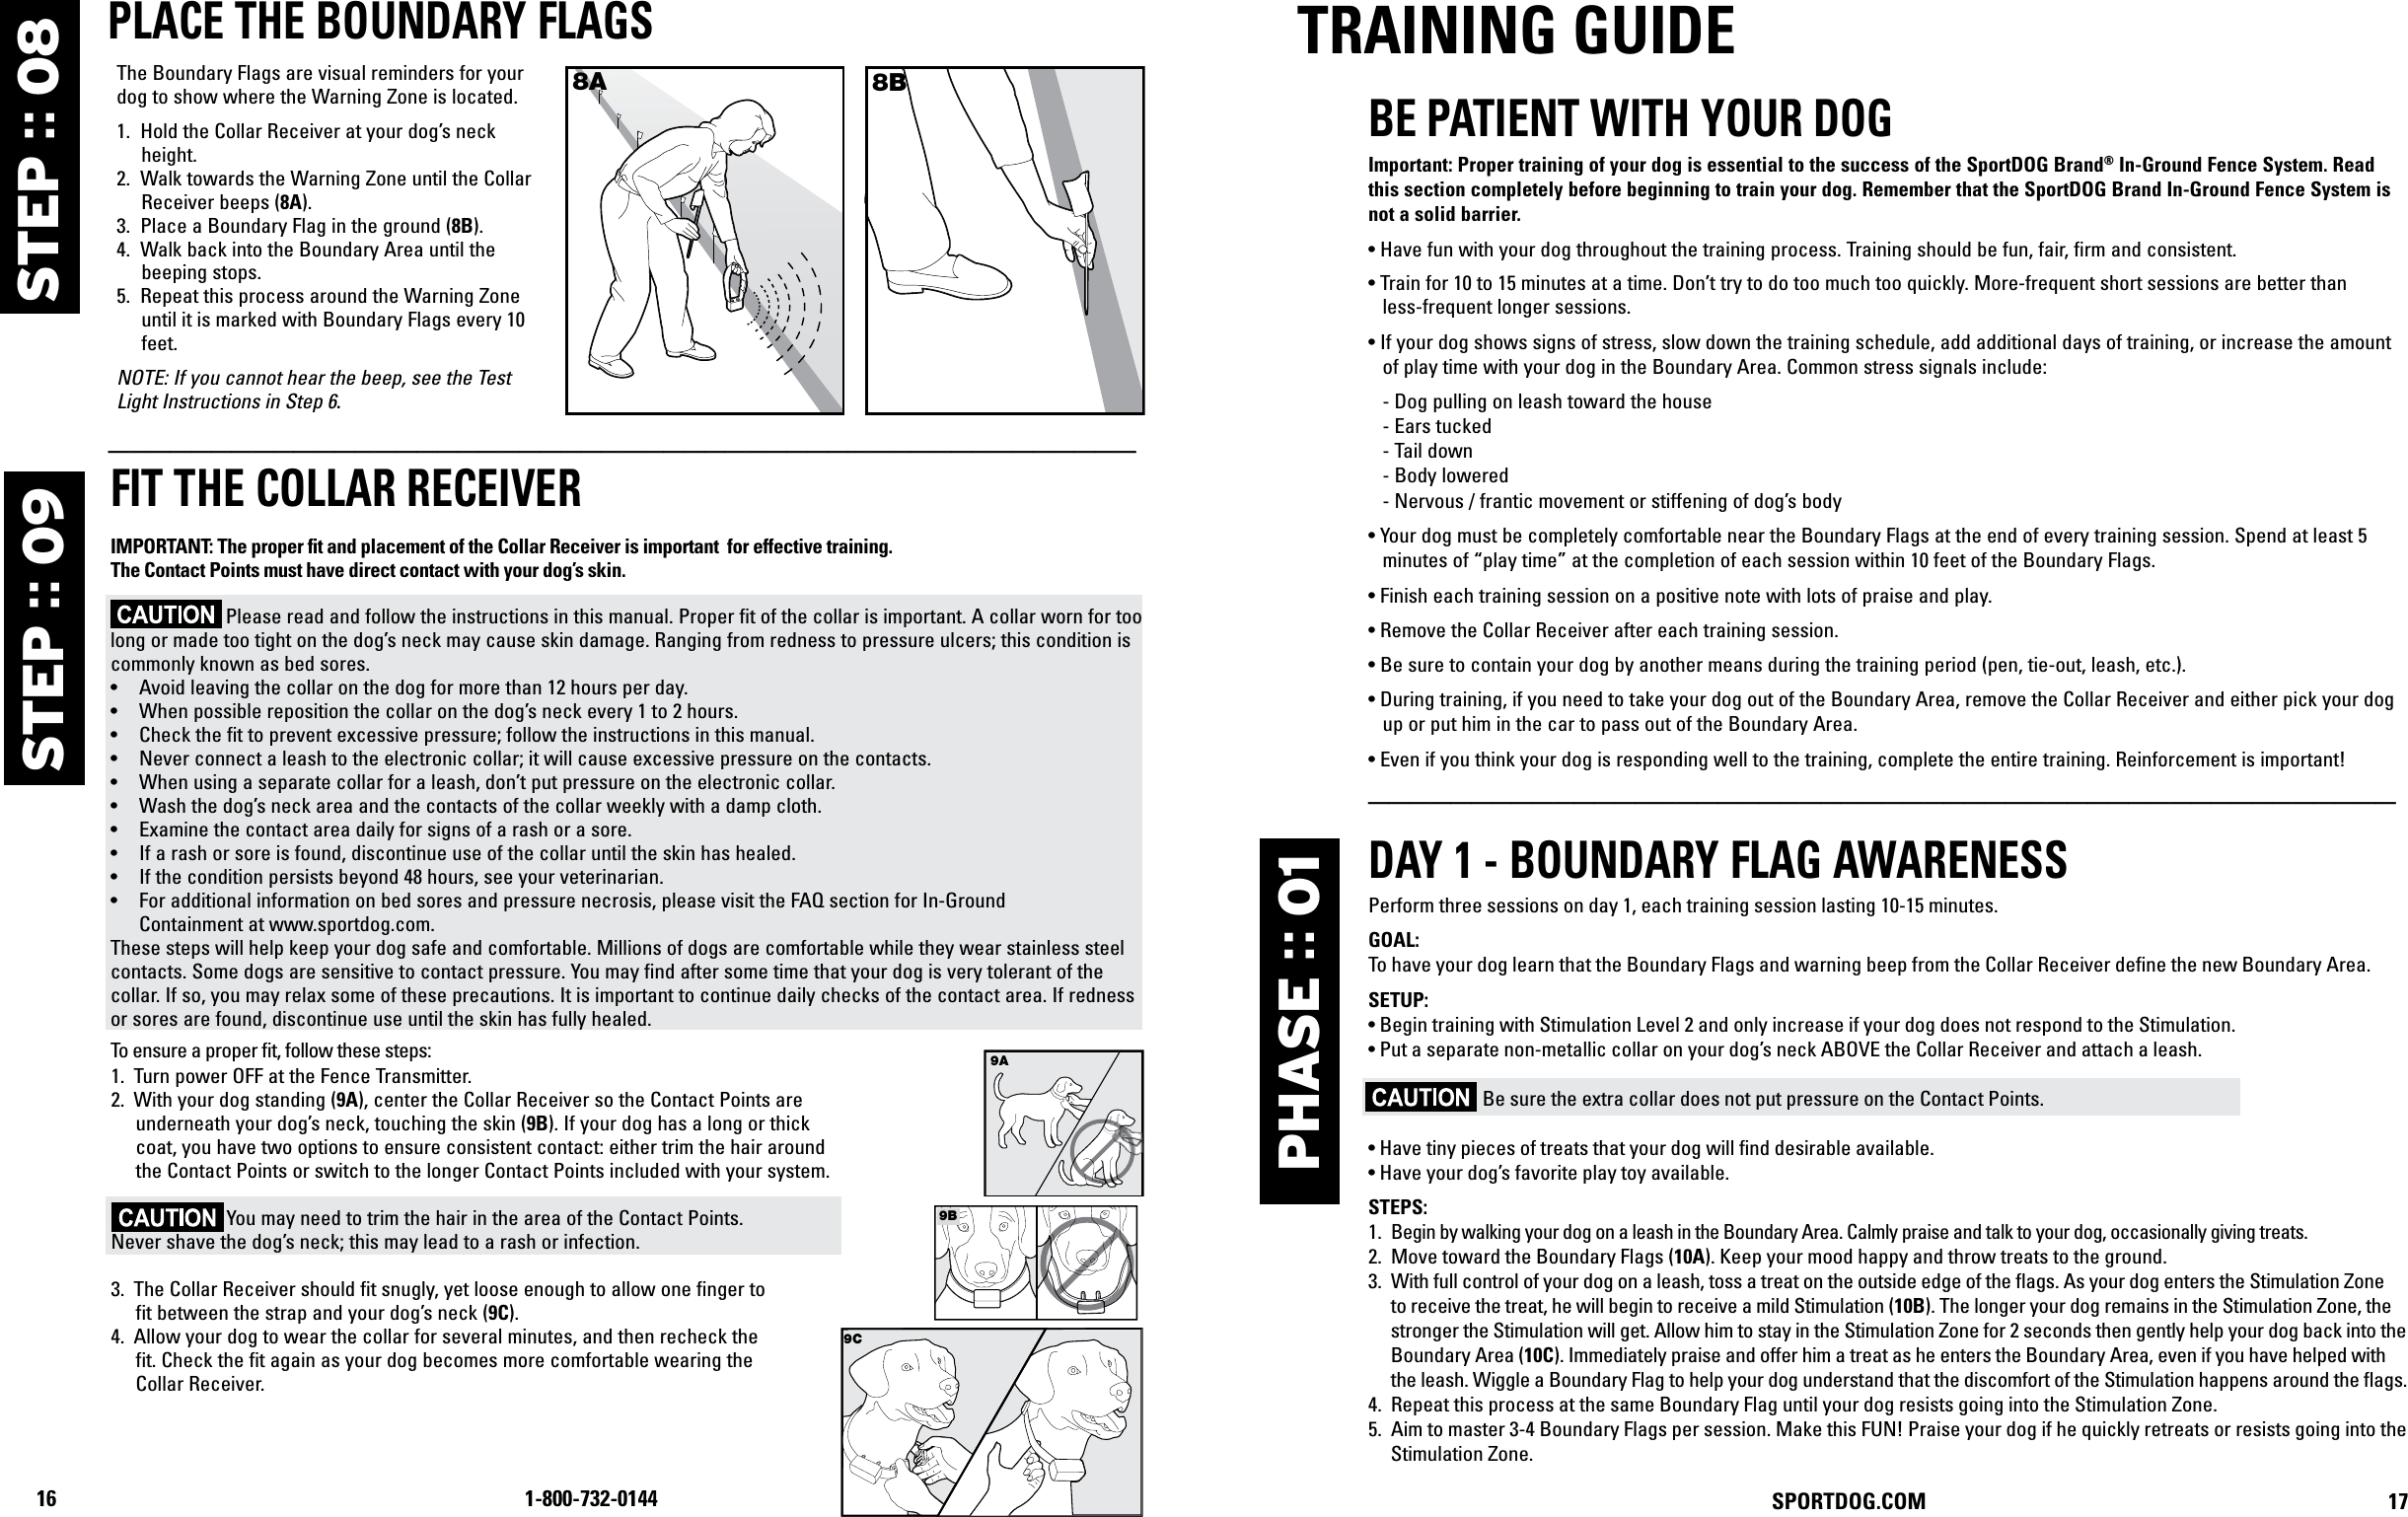 16 1-800-732-0144  SPORTDOG.COM                               17 PLACE THE BOUNDARY FLAGSThe Boundary Flags are visual reminders for your dog to show where the Warning Zone is located.1.  Hold the Collar Receiver at your dog’s neck height. 2.  Walk towards the Warning Zone until the Collar Receiver beeps (8A). 3.  Place a Boundary Flag in the ground (8B). 4.  Walk back into the Boundary Area until the beeping stops. 5.  Repeat this process around the Warning Zone until it is marked with Boundary Flags every 10 feet. NOTE: If you cannot hear the beep, see the Test Light Instructions in Step 6.8A 8B__________________________________________________FIT THE COLLAR RECEIVER IMPORTANT: The proper fit and placement of your Collar Receiver is important for effective training. The Contact Points must have direct contact with your dog’s skin on the underside of  his neck. To ensure a proper fit, follow these steps: 1.  With your dog standing (3A), center the Collar Receiver so the Contact Points areunderneath your dog’s neck, touching the skin (3B). If your dog has a long or thick coat, you have two options to ensure consistent contact: either trim the hair around the Contact Points or switch to the longer Contact Points included with your system.2.  The Collar Receiver should fit snugly, yet loose enough to allow one finger to fit between the strap and your dog’s neck (3C).3.  Allow your dog to wear the collar for several minutes, and then recheck thefit. Check the fit again as your dog becomes more comfortable wearing the Collar Receiver.CARE AND CLEANINGTo ensure the effectiveness of this product and the comfort and safety of your dog, check the fit of his collar frequently. If you notice that your dog is experiencing skin irritation, discontinue use of the collar for a few days. If the condition persists beyond 48 hours, see your veterinarian.TO PREVENT SKIN IRRITATION FROM OCCURRING:• The Collar Receiver should not be worn for more than 8 hours out of every 24-hour period.• Your dog’s neck and the Contact Points must be washed weekly with a washcloth and mild hand soap, then rinsed thoroughly.PHASE :: 01TRAINING GUIDEBE PATIENT WITH YOUR DOGImportant: Proper training of your dog is essential to the success of the SportDOG Brand® In-Ground Fence System. Read this section completely before beginning to train your dog. Remember that the SportDOG Brand In-Ground Fence System is not a solid barrier.•  Have fun with your dog throughout the training process. Training should be fun, fair, firm and consistent. •  Train for 10 to 15 minutes at a time. Don’t try to do too much too quickly. More-frequent short sessions are better than  less-frequent longer sessions.•  If your dog shows signs of stress, slow down the training schedule, add additional days of training, or increase the amount of play time with your dog in the Boundary Area. Common stress signals include:   - Dog pulling on leash toward the house  - Ears tucked  - Tail down  - Body lowered  - Nervous / frantic movement or stiffening of dog’s body • Your dog must be completely comfortable near the Boundary Flags at the end of every training session. Spend at least 5 minutes of “play time” at the completion of each session within 10 feet of the Boundary Flags.• Finish each training session on a positive note with lots of praise and play.• Remove the Collar Receiver after each training session.•  Be sure to contain your dog by another means during the training period (pen, tie-out, leash, etc.). • During training, if you need to take your dog out of the Boundary Area, remove the Collar Receiver and either pick your dog up or put him in the car to pass out of the Boundary Area. • Even if you think your dog is responding well to the training, complete the entire training. Reinforcement is important!__________________________________________________DAY 1 - BOUNDARY FLAG AWARENESSPerform three sessions on day 1, each training session lasting 10-15 minutes.GOAL:To have your dog learn that the Boundary Flags and warning beep from the Collar Receiver deﬁne the new Boundary Area. SETUP:• Begin training with Stimulation Level 2 and only increase if your dog does not respond to the Stimulation.• Put a separate non-metallic collar on your dog’s neck ABOVE the Collar Receiver and attach a leash.                     Be sure the extra collar does not put pressure on the Contact Points.• Have tiny pieces of treats that your dog will ﬁnd desirable available.• Have your dog’s favorite play toy available.STEPS:1.  Begin by walking your dog on a leash in the Boundary Area. Calmly praise and talk to your dog, occasionally giving treats. 2.  Move toward the Boundary Flags (10A). Keep your mood happy and throw treats to the ground.3.  With full control of your dog on a leash, toss a treat on the outside edge of the ﬂags. As your dog enters the Stimulation Zone to receive the treat, he will begin to receive a mild Stimulation (10B). The longer your dog remains in the Stimulation Zone, the stronger the Stimulation will get. Allow him to stay in the Stimulation Zone for 2 seconds then gently help your dog back into the Boundary Area (10C). Immediately praise and offer him a treat as he enters the Boundary Area, even if you have helped with the leash. Wiggle a Boundary Flag to help your dog understand that the discomfort of the Stimulation happens around the ﬂags.4.  Repeat this process at the same Boundary Flag until your dog resists going into the Stimulation Zone.5.  Aim to master 3-4 Boundary Flags per session. Make this FUN! Praise your dog if he quickly retreats or resists going into the Stimulation Zone. STEP :: 09 STEP :: 089A9C1.  Turn power OFF at the Fence Transmitter.2.  With your dog standing (9A), center the Collar Receiver so the Contact Points are underneath your dog’s neck, touching the skin (9B). If your dog has a long or thick coat, you have two options to ensure consistent contact: either trim the hair around the Contact Points or switch to the longer Contact Points included with your system.                        You may need to trim the hair in the area of the Contact Points. Never shave the dog’s neck; this may lead to a rash or infection. 3.  The Collar Receiver should fit snugly, yet loose enough to allow one finger to fit between the strap and your dog’s neck (9C).4.  Allow your dog to wear the collar for several minutes, and then recheck the fit. Check the fit again as your dog becomes more comfortable wearing the Collar Receiver.FIT THE COLLAR RECEIVERIMPORTANT: The proper ﬁt and placement of the Collar Receiver is important  for effective training. The Contact Points must have direct contact with your dog’s skin.                       Please read and follow the instructions in this manual. Proper fit of the collar is important. A collar worn for too long or made too tight on the dog’s neck may cause skin damage. Ranging from redness to pressure ulcers; this condition is commonly known as bed sores. •  Avoid leaving the collar on the dog for more than 12 hours per day.•  When possible reposition the collar on the dog’s neck every 1 to 2 hours.•  Check the fit to prevent excessive pressure; follow the instructions in this manual.•  Never connect a leash to the electronic collar; it will cause excessive pressure on the contacts.•  When using a separate collar for a leash, don’t put pressure on the electronic collar.•  Wash the dog’s neck area and the contacts of the collar weekly with a damp cloth.•  Examine the contact area daily for signs of a rash or a sore.•  If a rash or sore is found, discontinue use of the collar until the skin has healed.•  If the condition persists beyond 48 hours, see your veterinarian.•  For additional information on bed sores and pressure necrosis, please visit the FAQ section for In-Ground    Containment at www.sportdog.com.These steps will help keep your dog safe and comfortable. Millions of dogs are comfortable while they wear stainless steel contacts. Some dogs are sensitive to contact pressure. You may find after some time that your dog is very tolerant of the collar. If so, you may relax some of these precautions. It is important to continue daily checks of the contact area. If redness or sores are found, discontinue use until the skin has fully healed.To ensure a proper ﬁt, follow these steps:9B